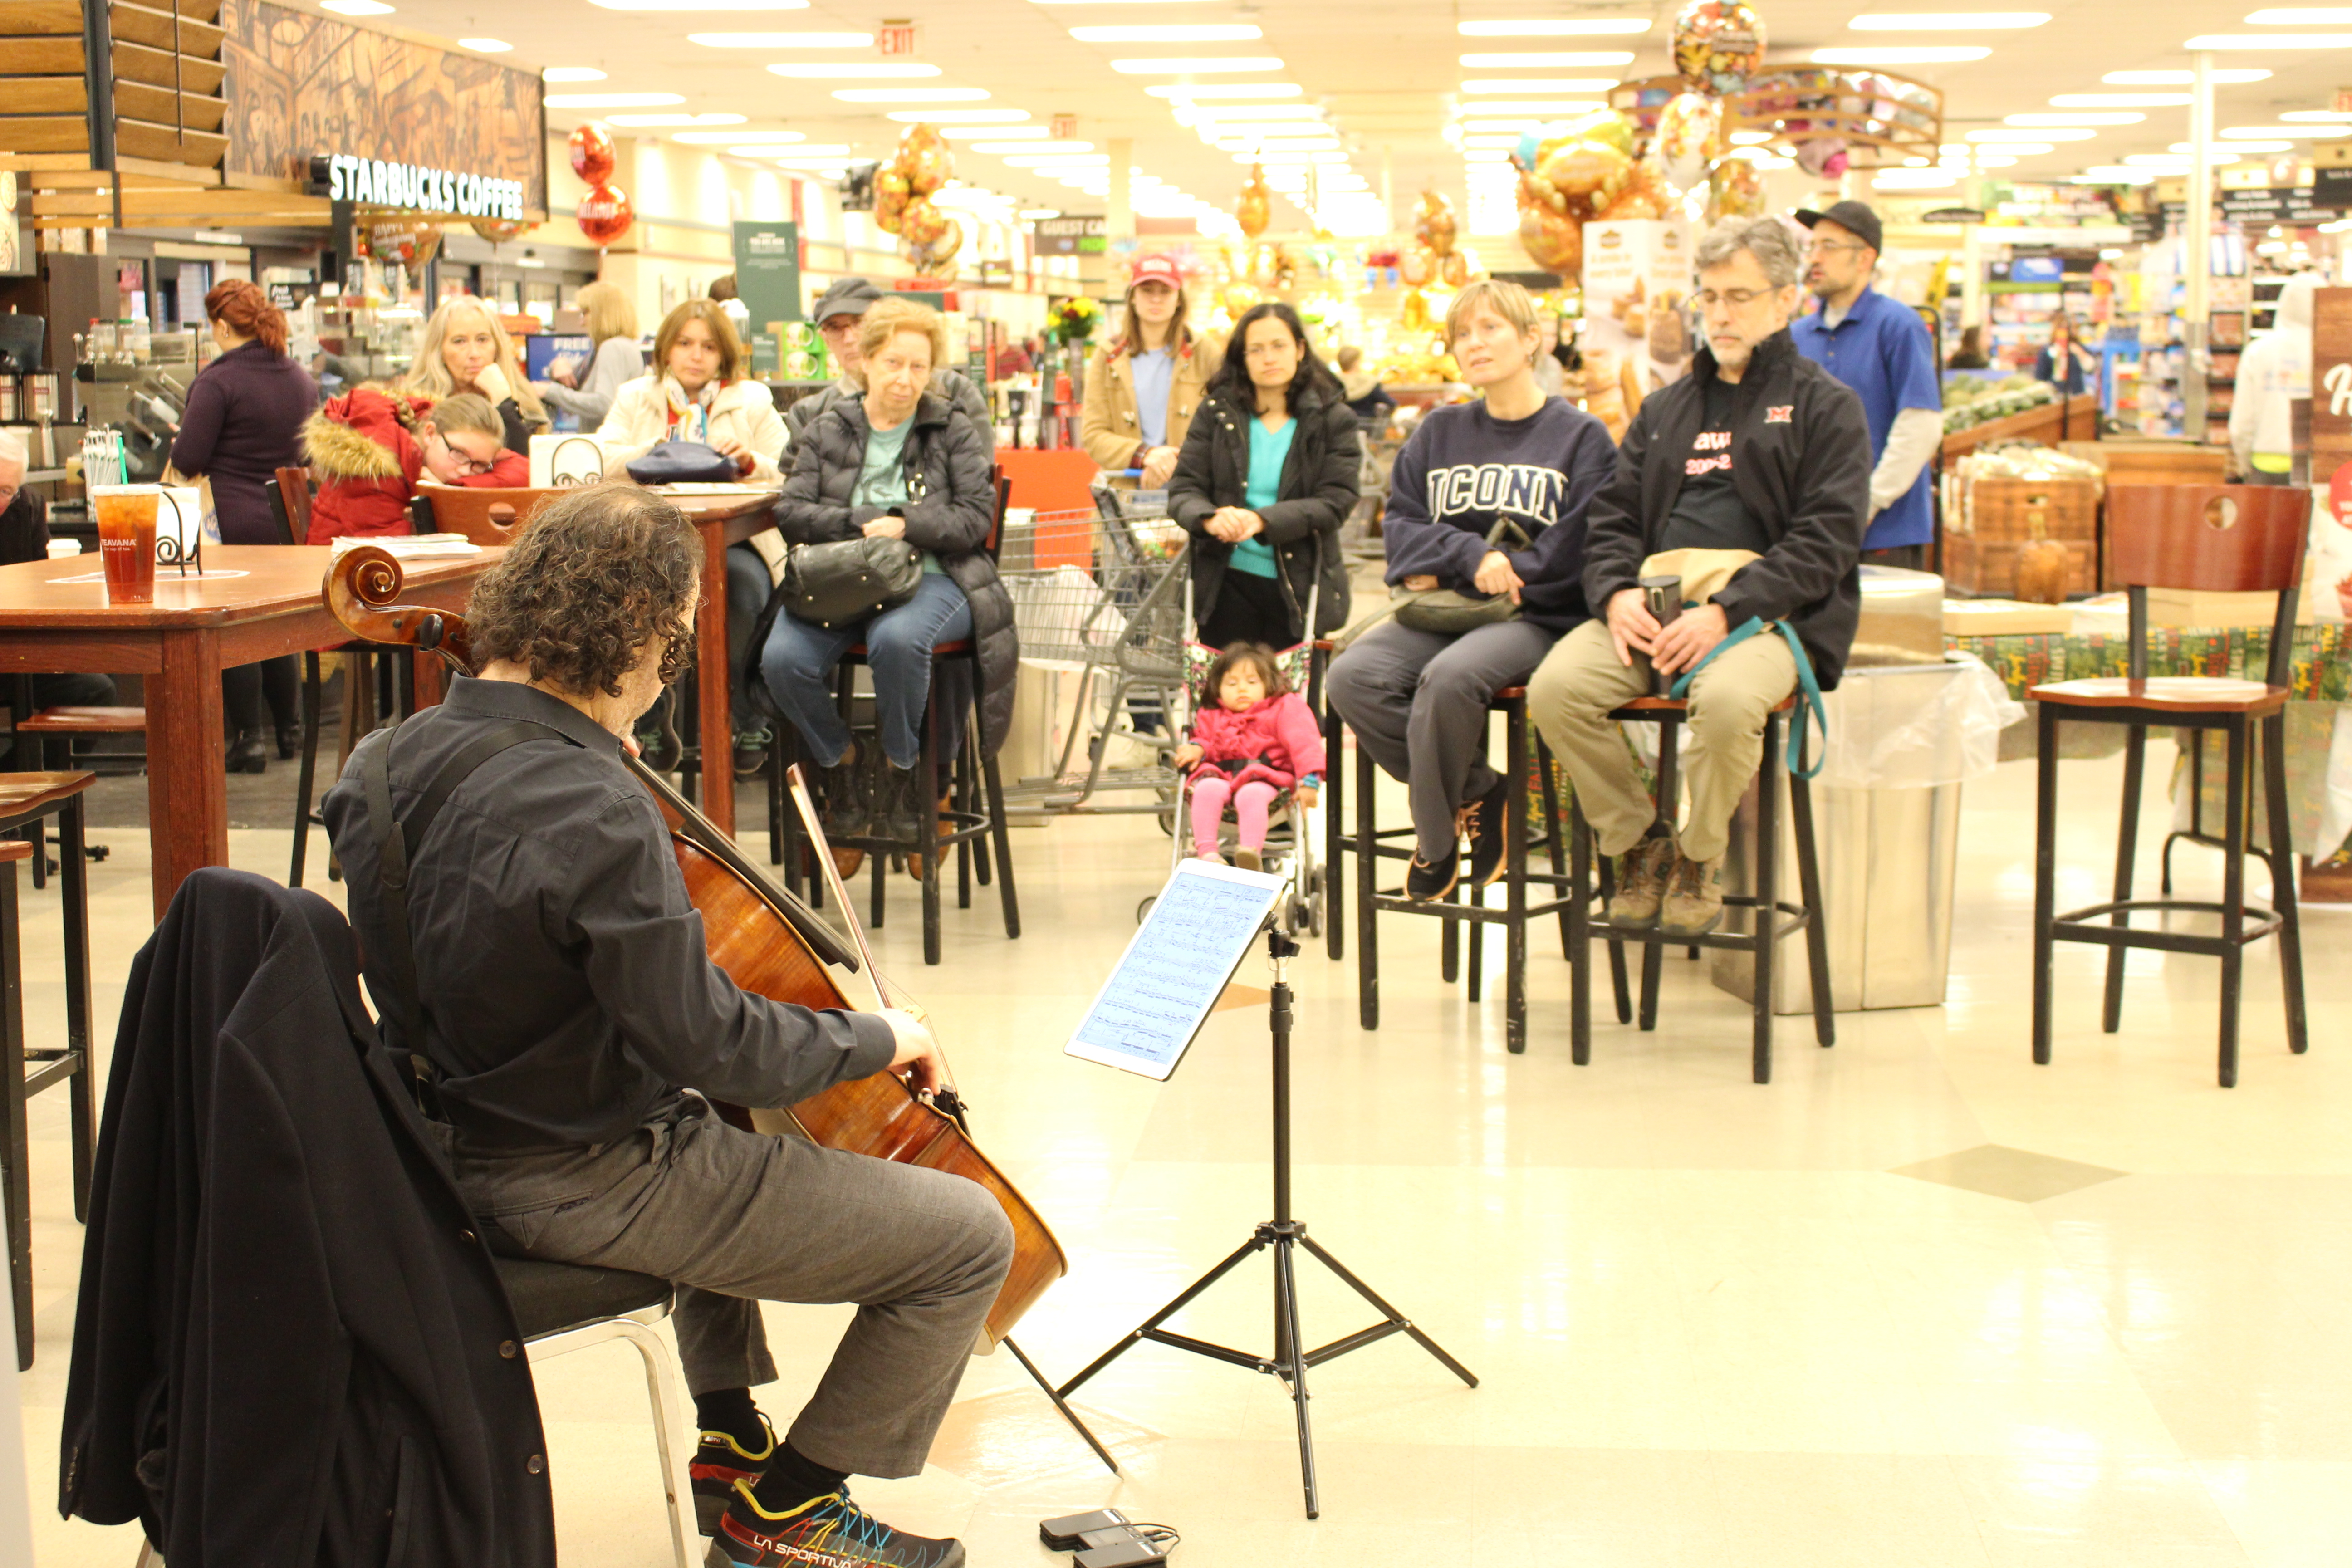 Matt Haimovitz playing cello at Kroger with people watching him perform in front of Starbucks